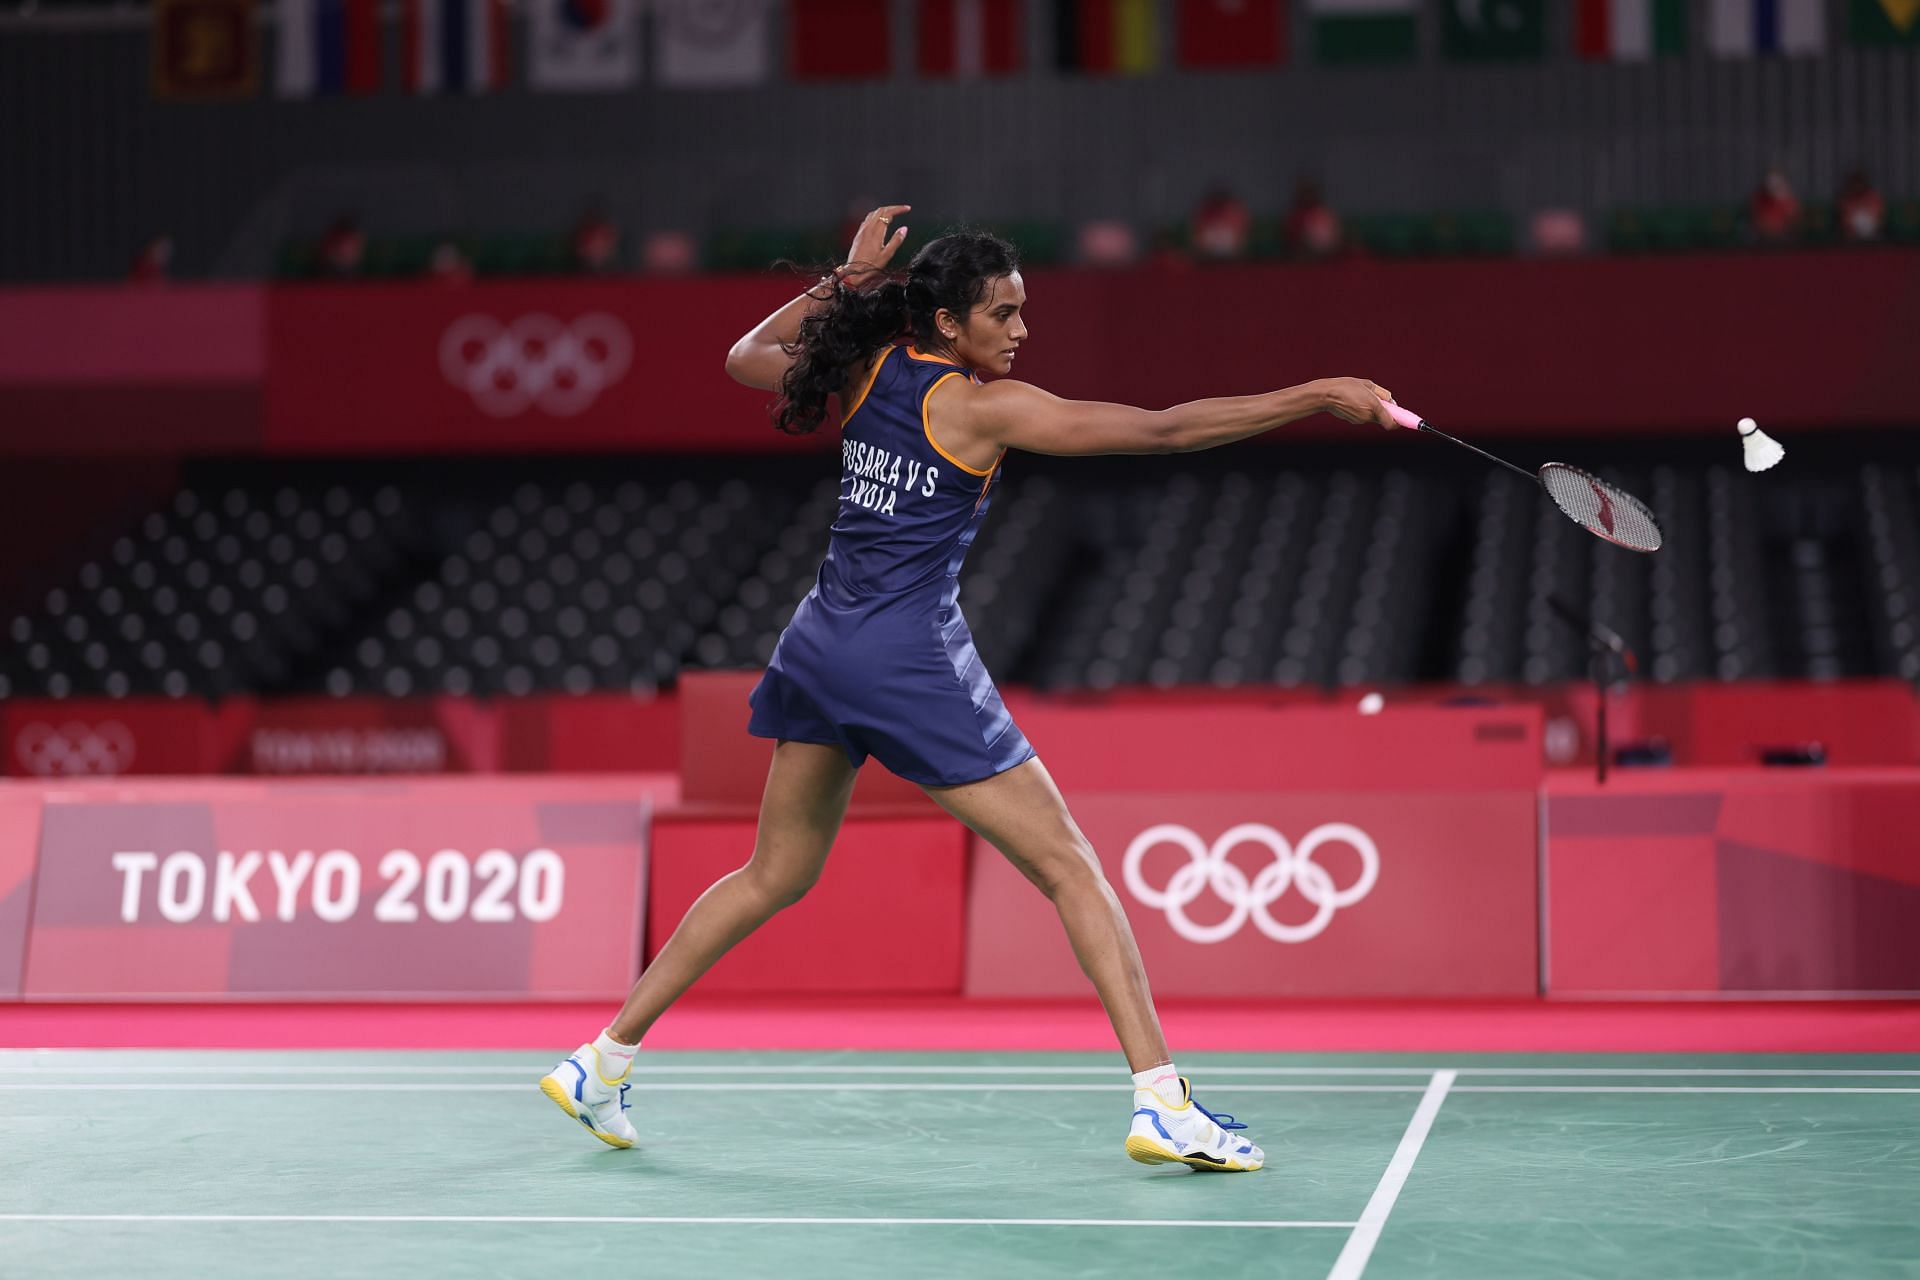 PV Sindhu at the Tokyo Olympics. (PC: Getty Images)